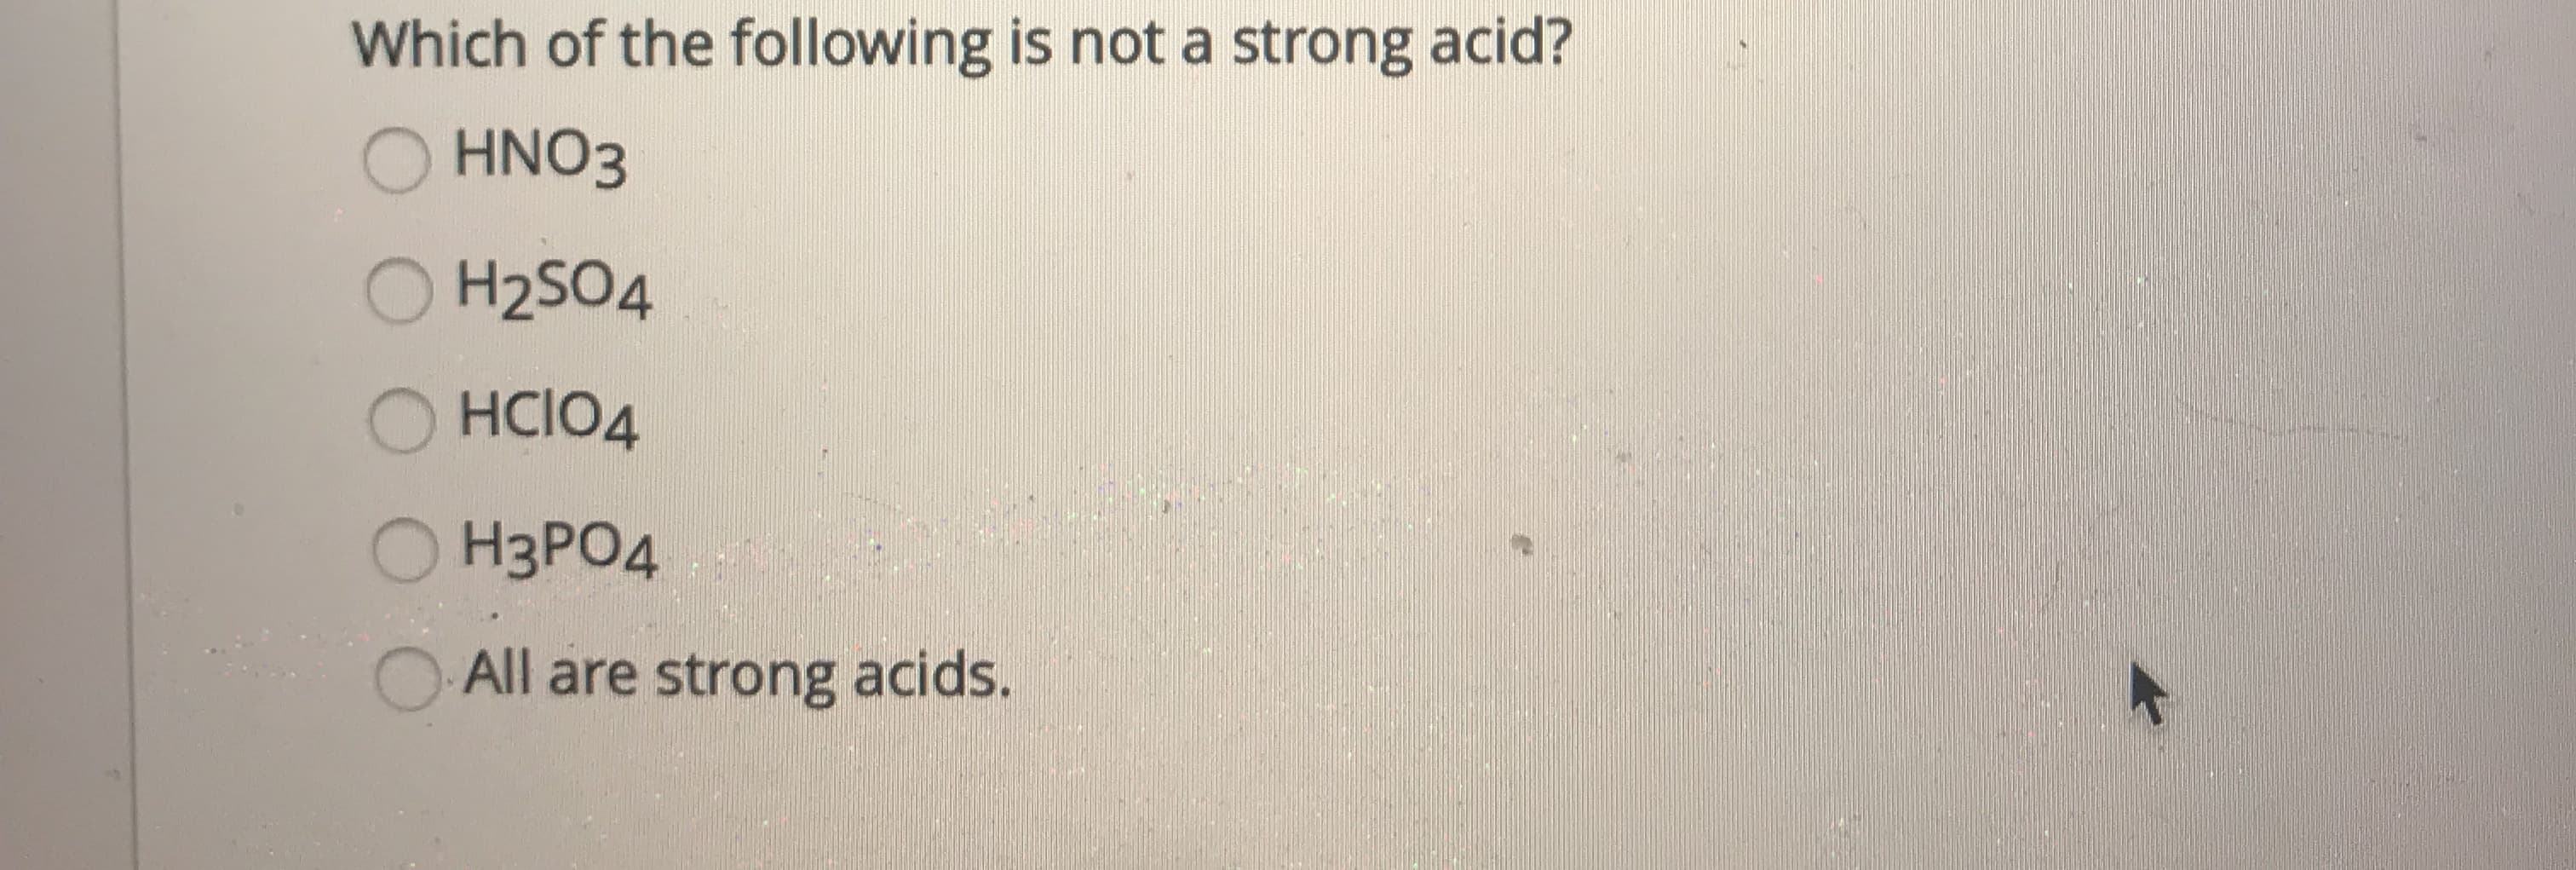 Which of the following is not a strong acid?
O HNO3
O H2SO4
O HCIO4
O H3PO4
O-All are strong acids.
